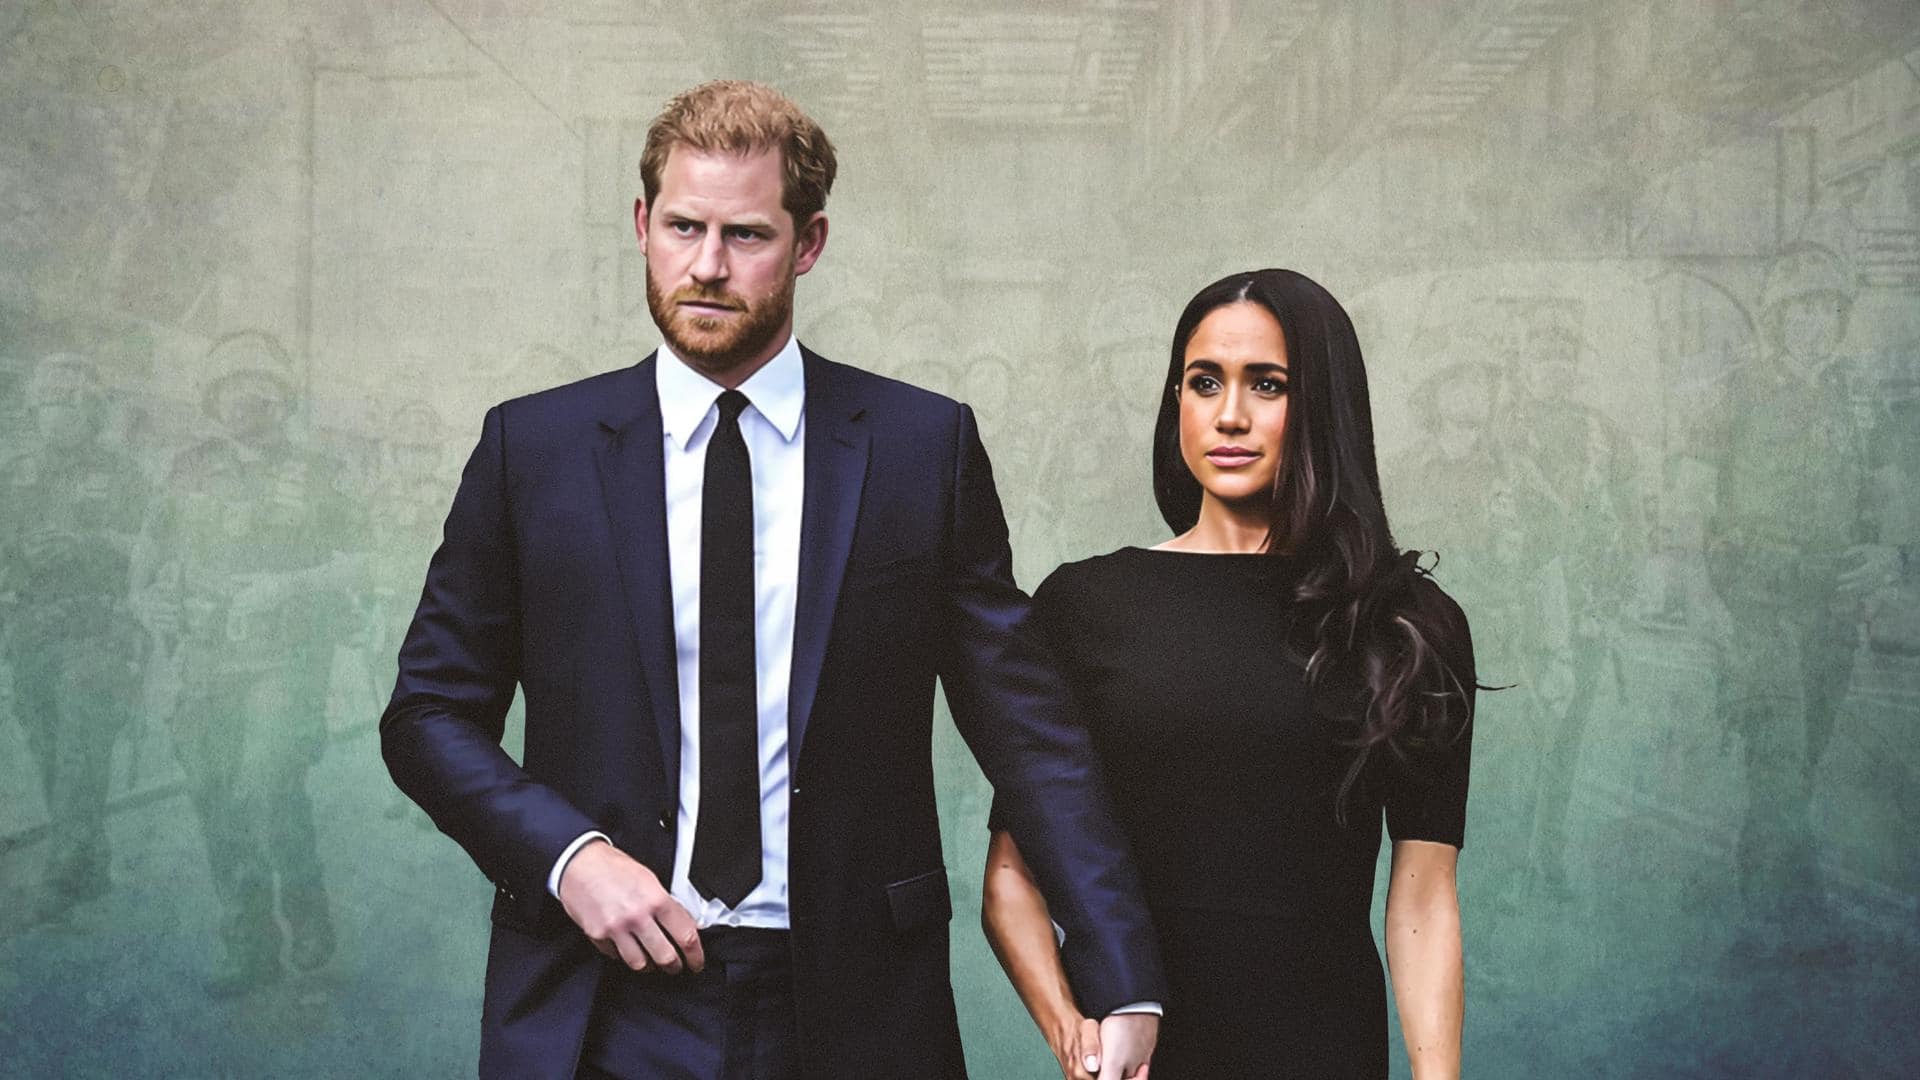 'Hard to believe…': NYC officials downplay Harry, Meghan's 'car chase'